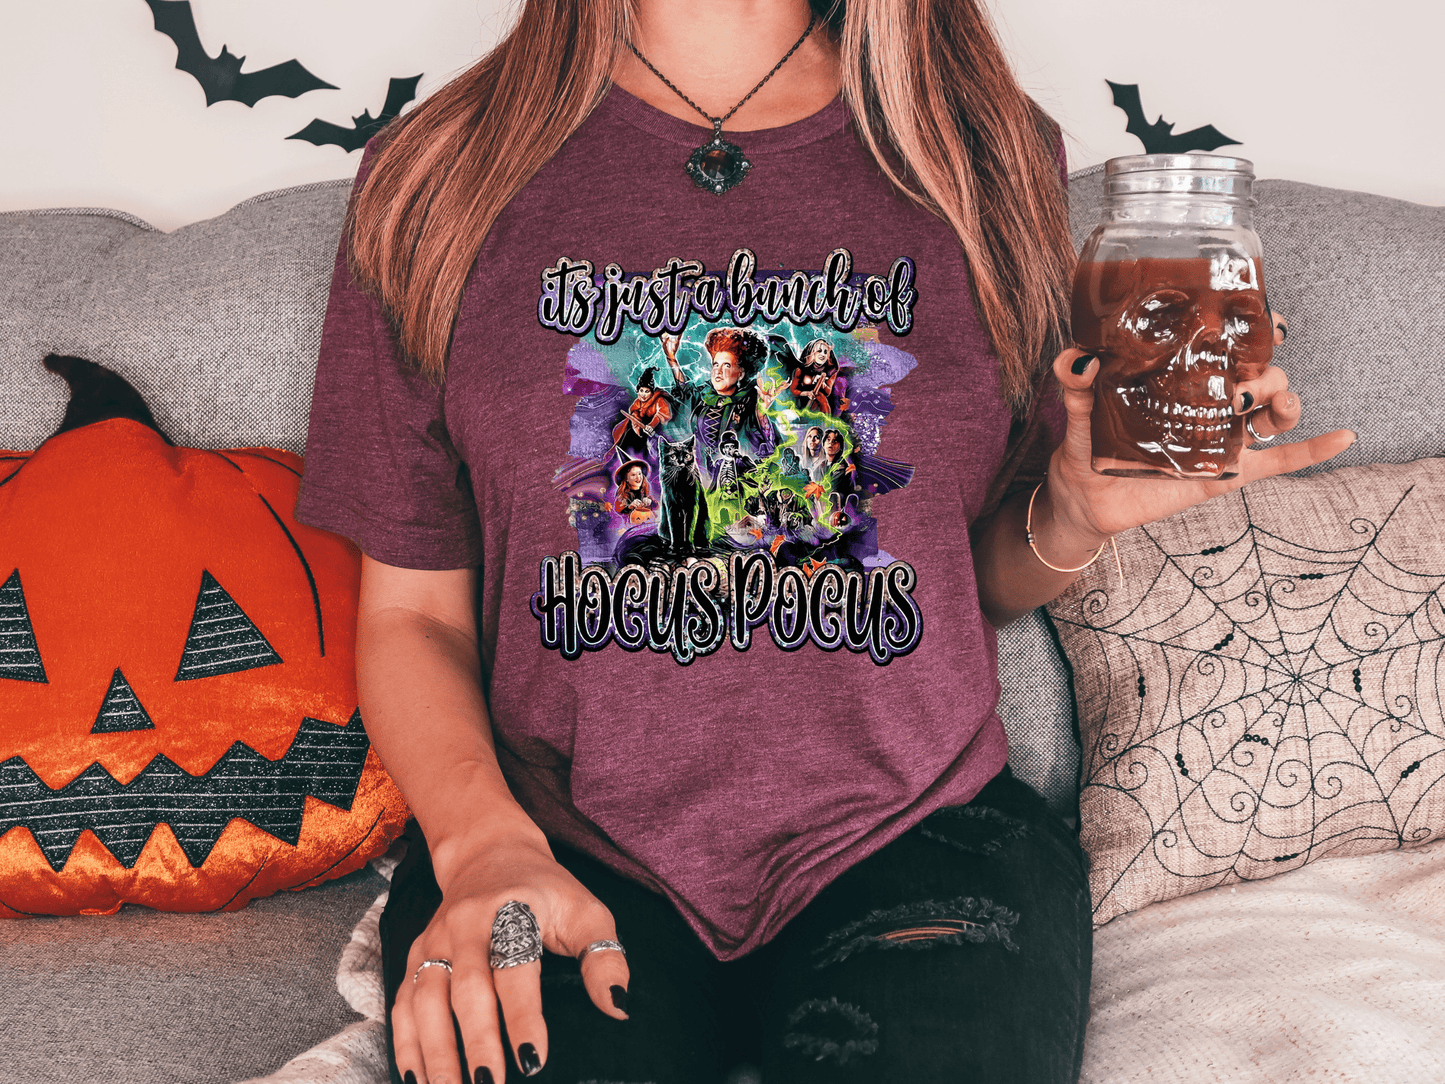 It's Just A Bunch Of HP Glitter ADULT Shirt